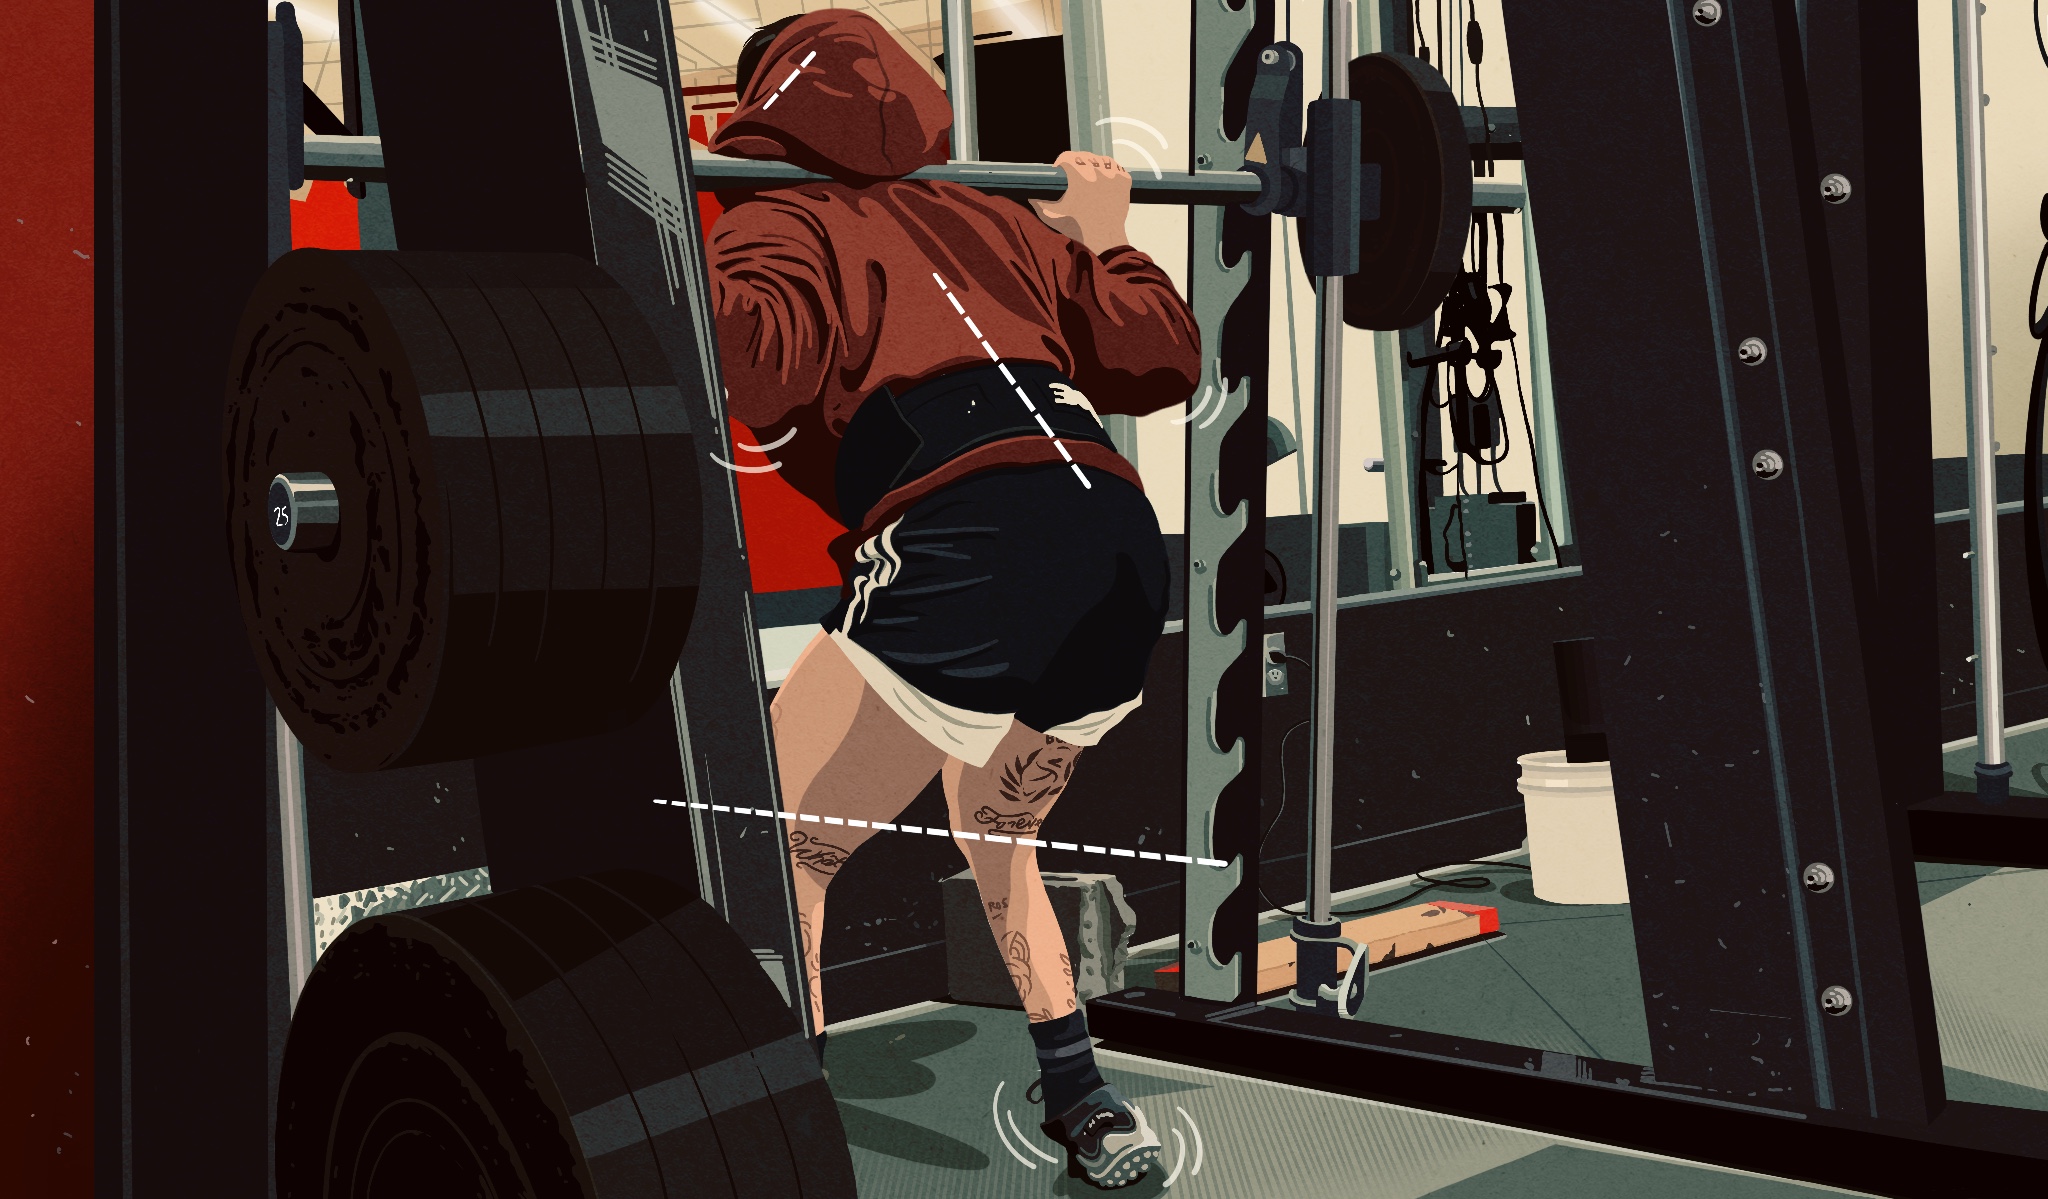 Art of a person seen from behind wearing a hoodie and shorts, with tattoos on their legs, in the process of lifting a barbell